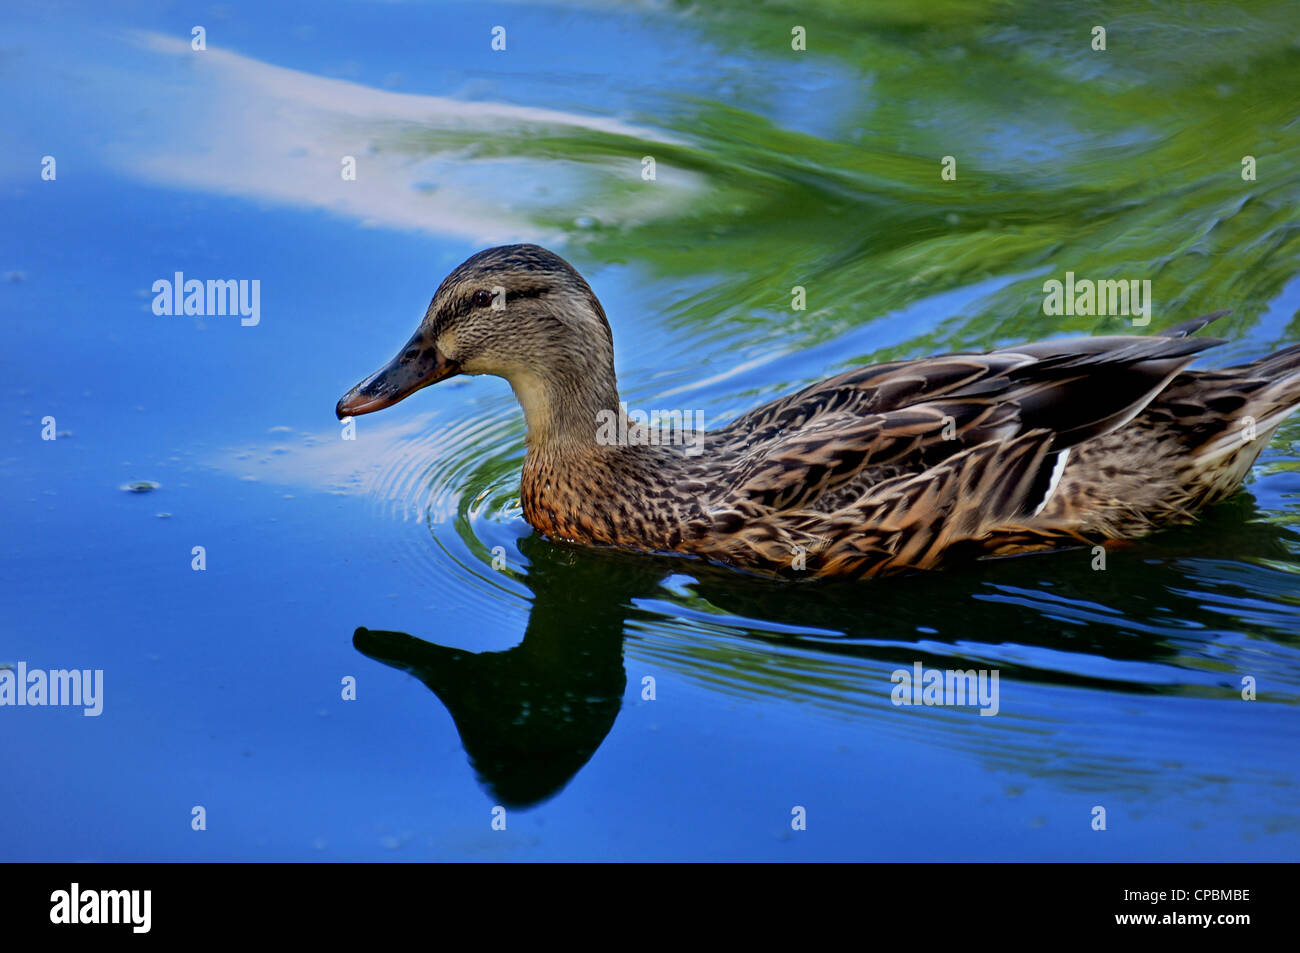 female wood duck swimming in blue reflecting pond with green trees reflecting Stock Photo